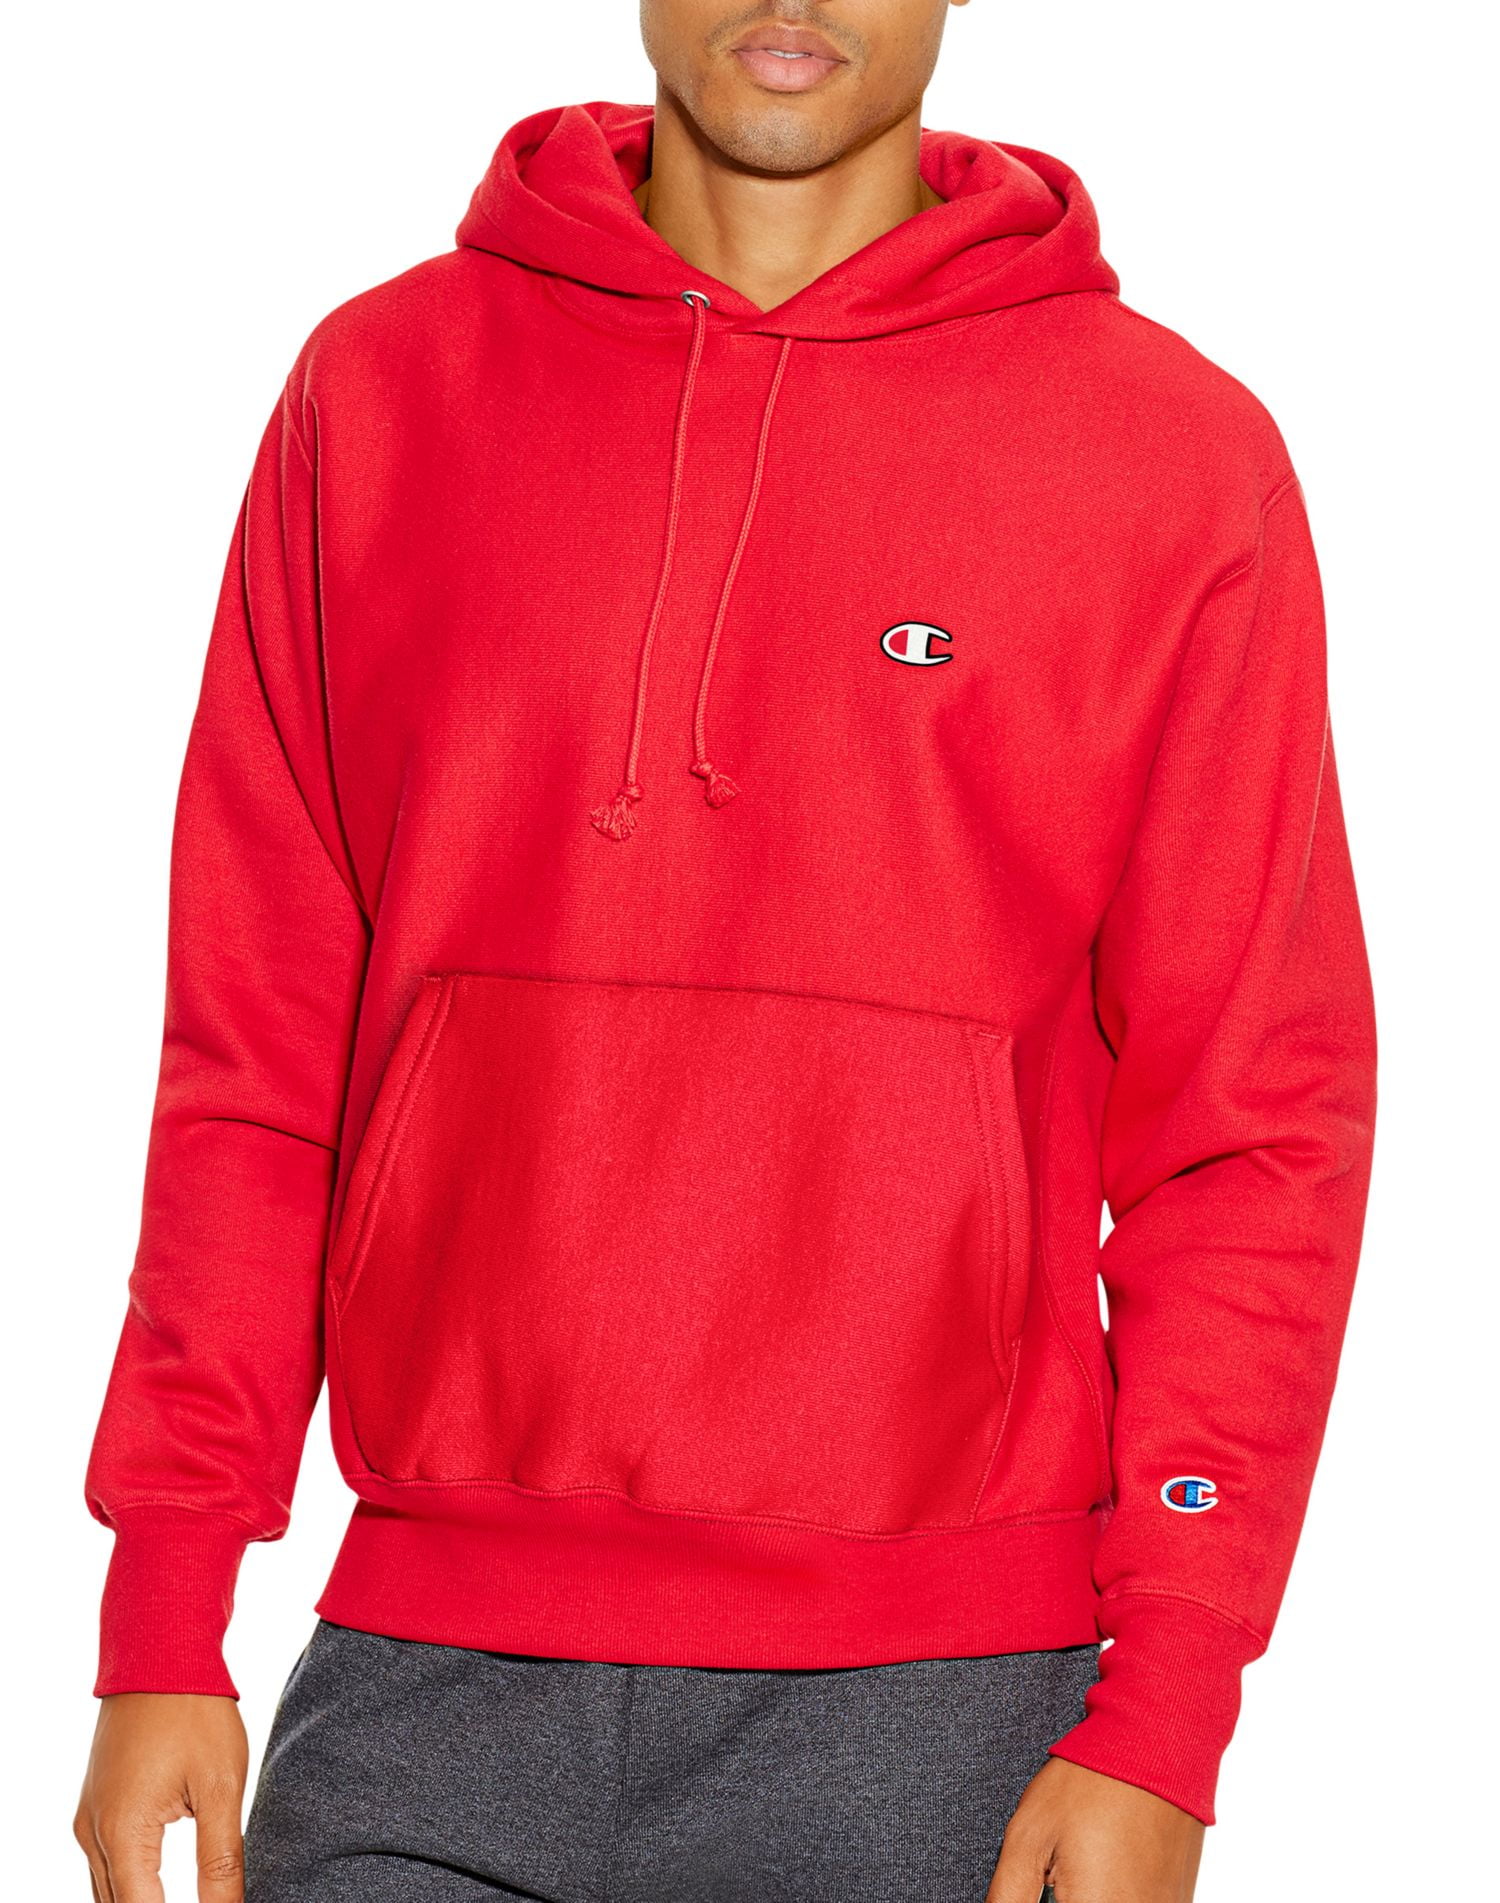 Champion Life Adult Reverse Weave Pullover Hoodie, M, 68 Team Red Scarlet